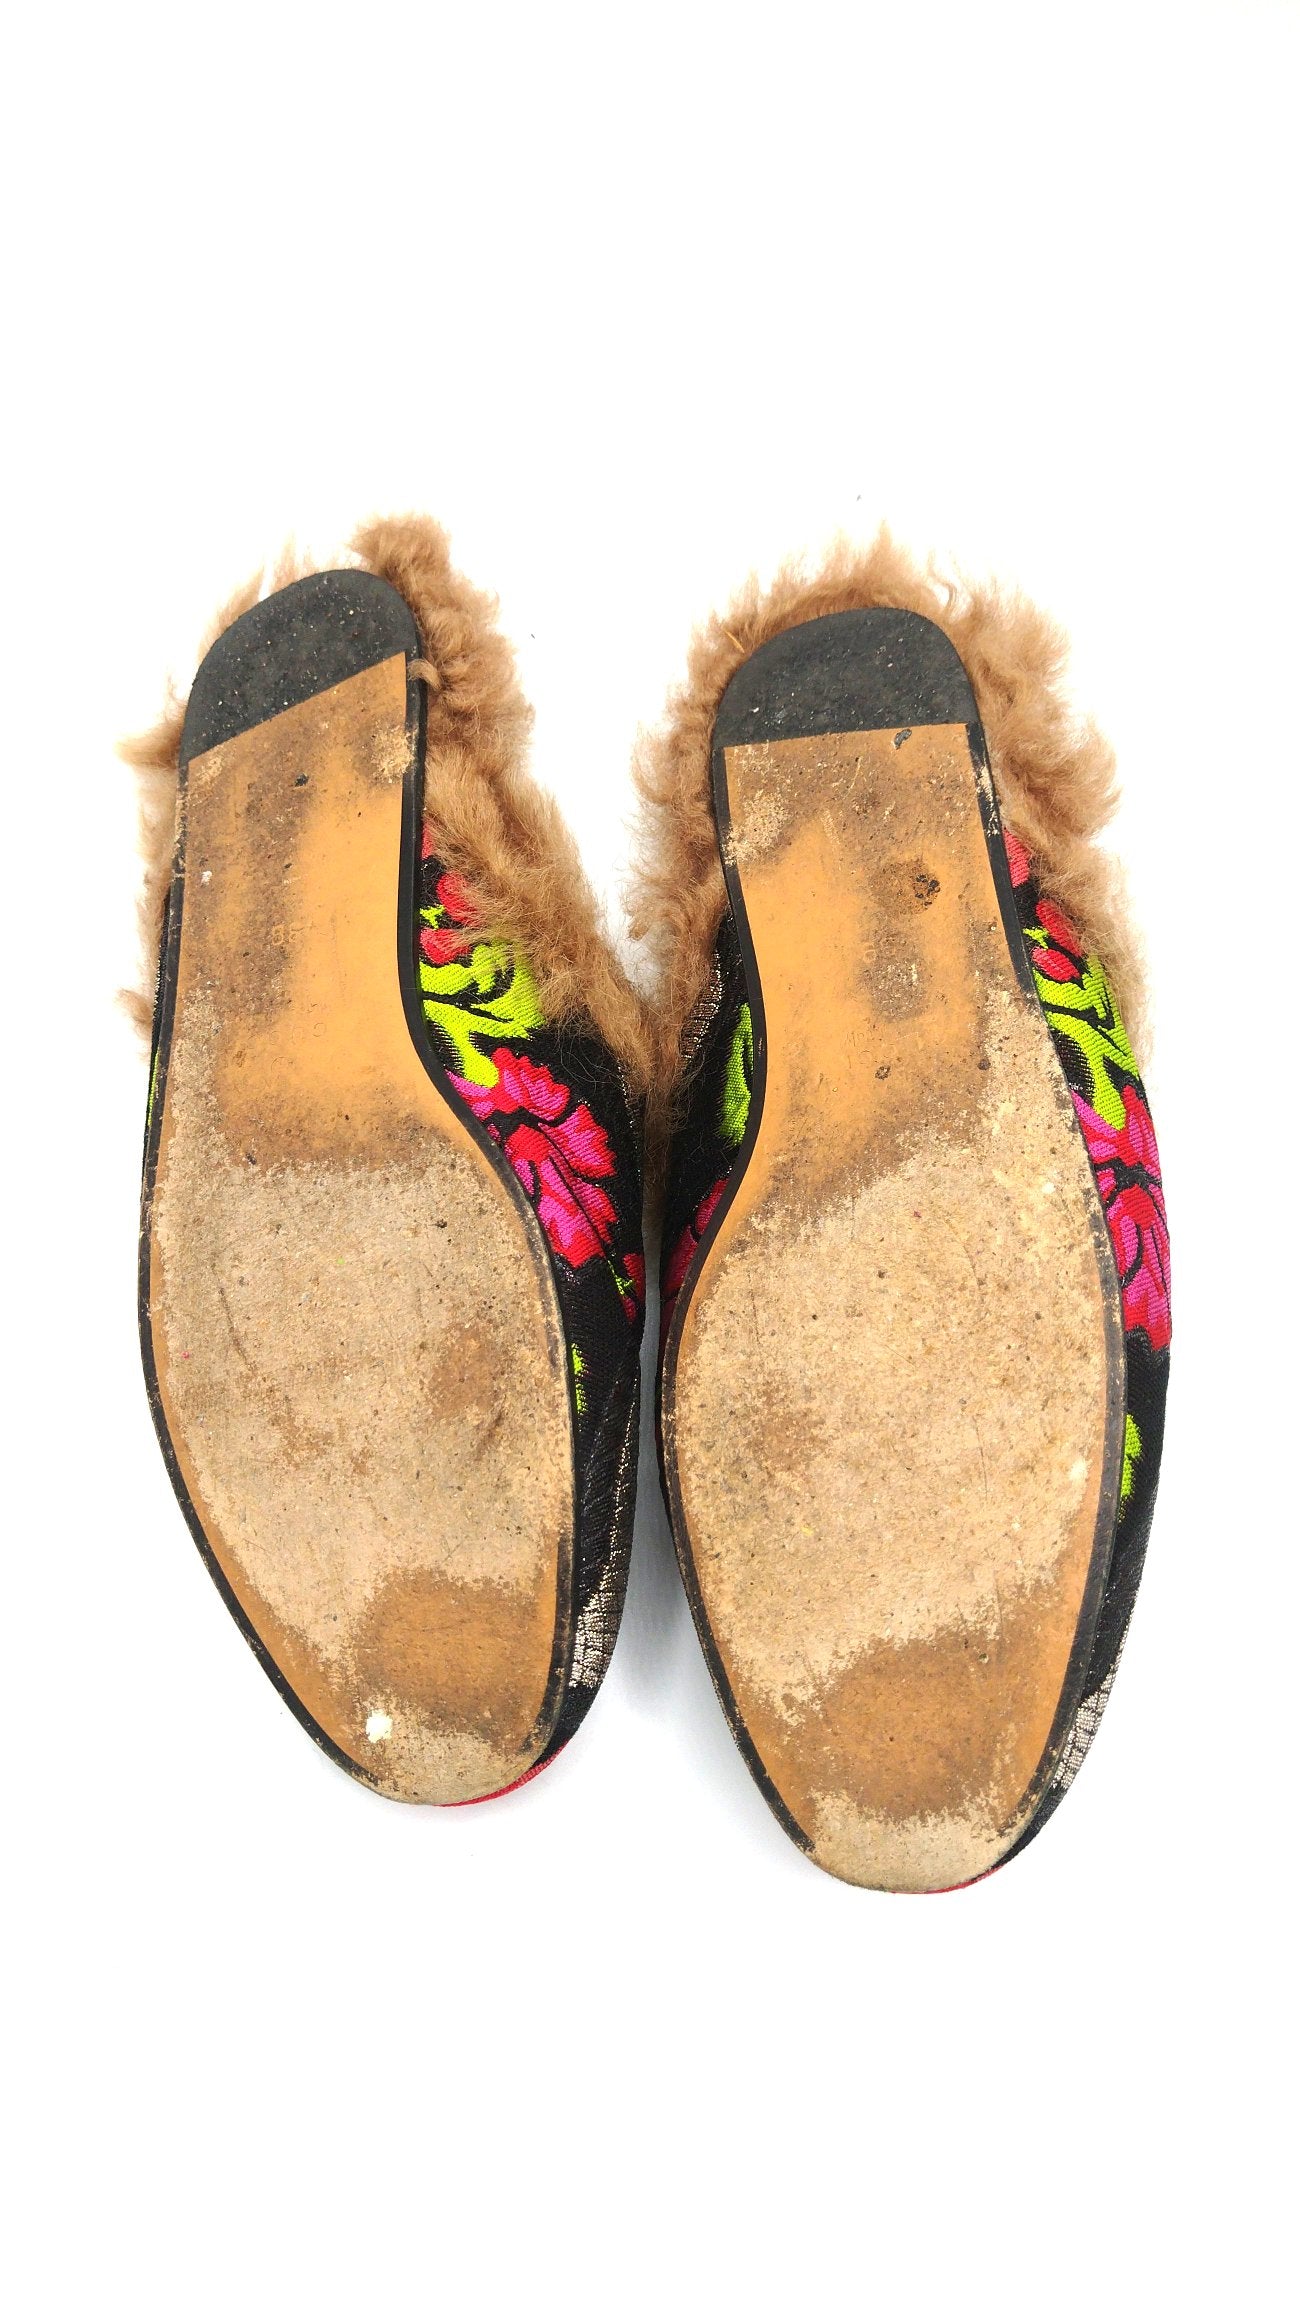 GUCCI Princetown fur loafers size 39